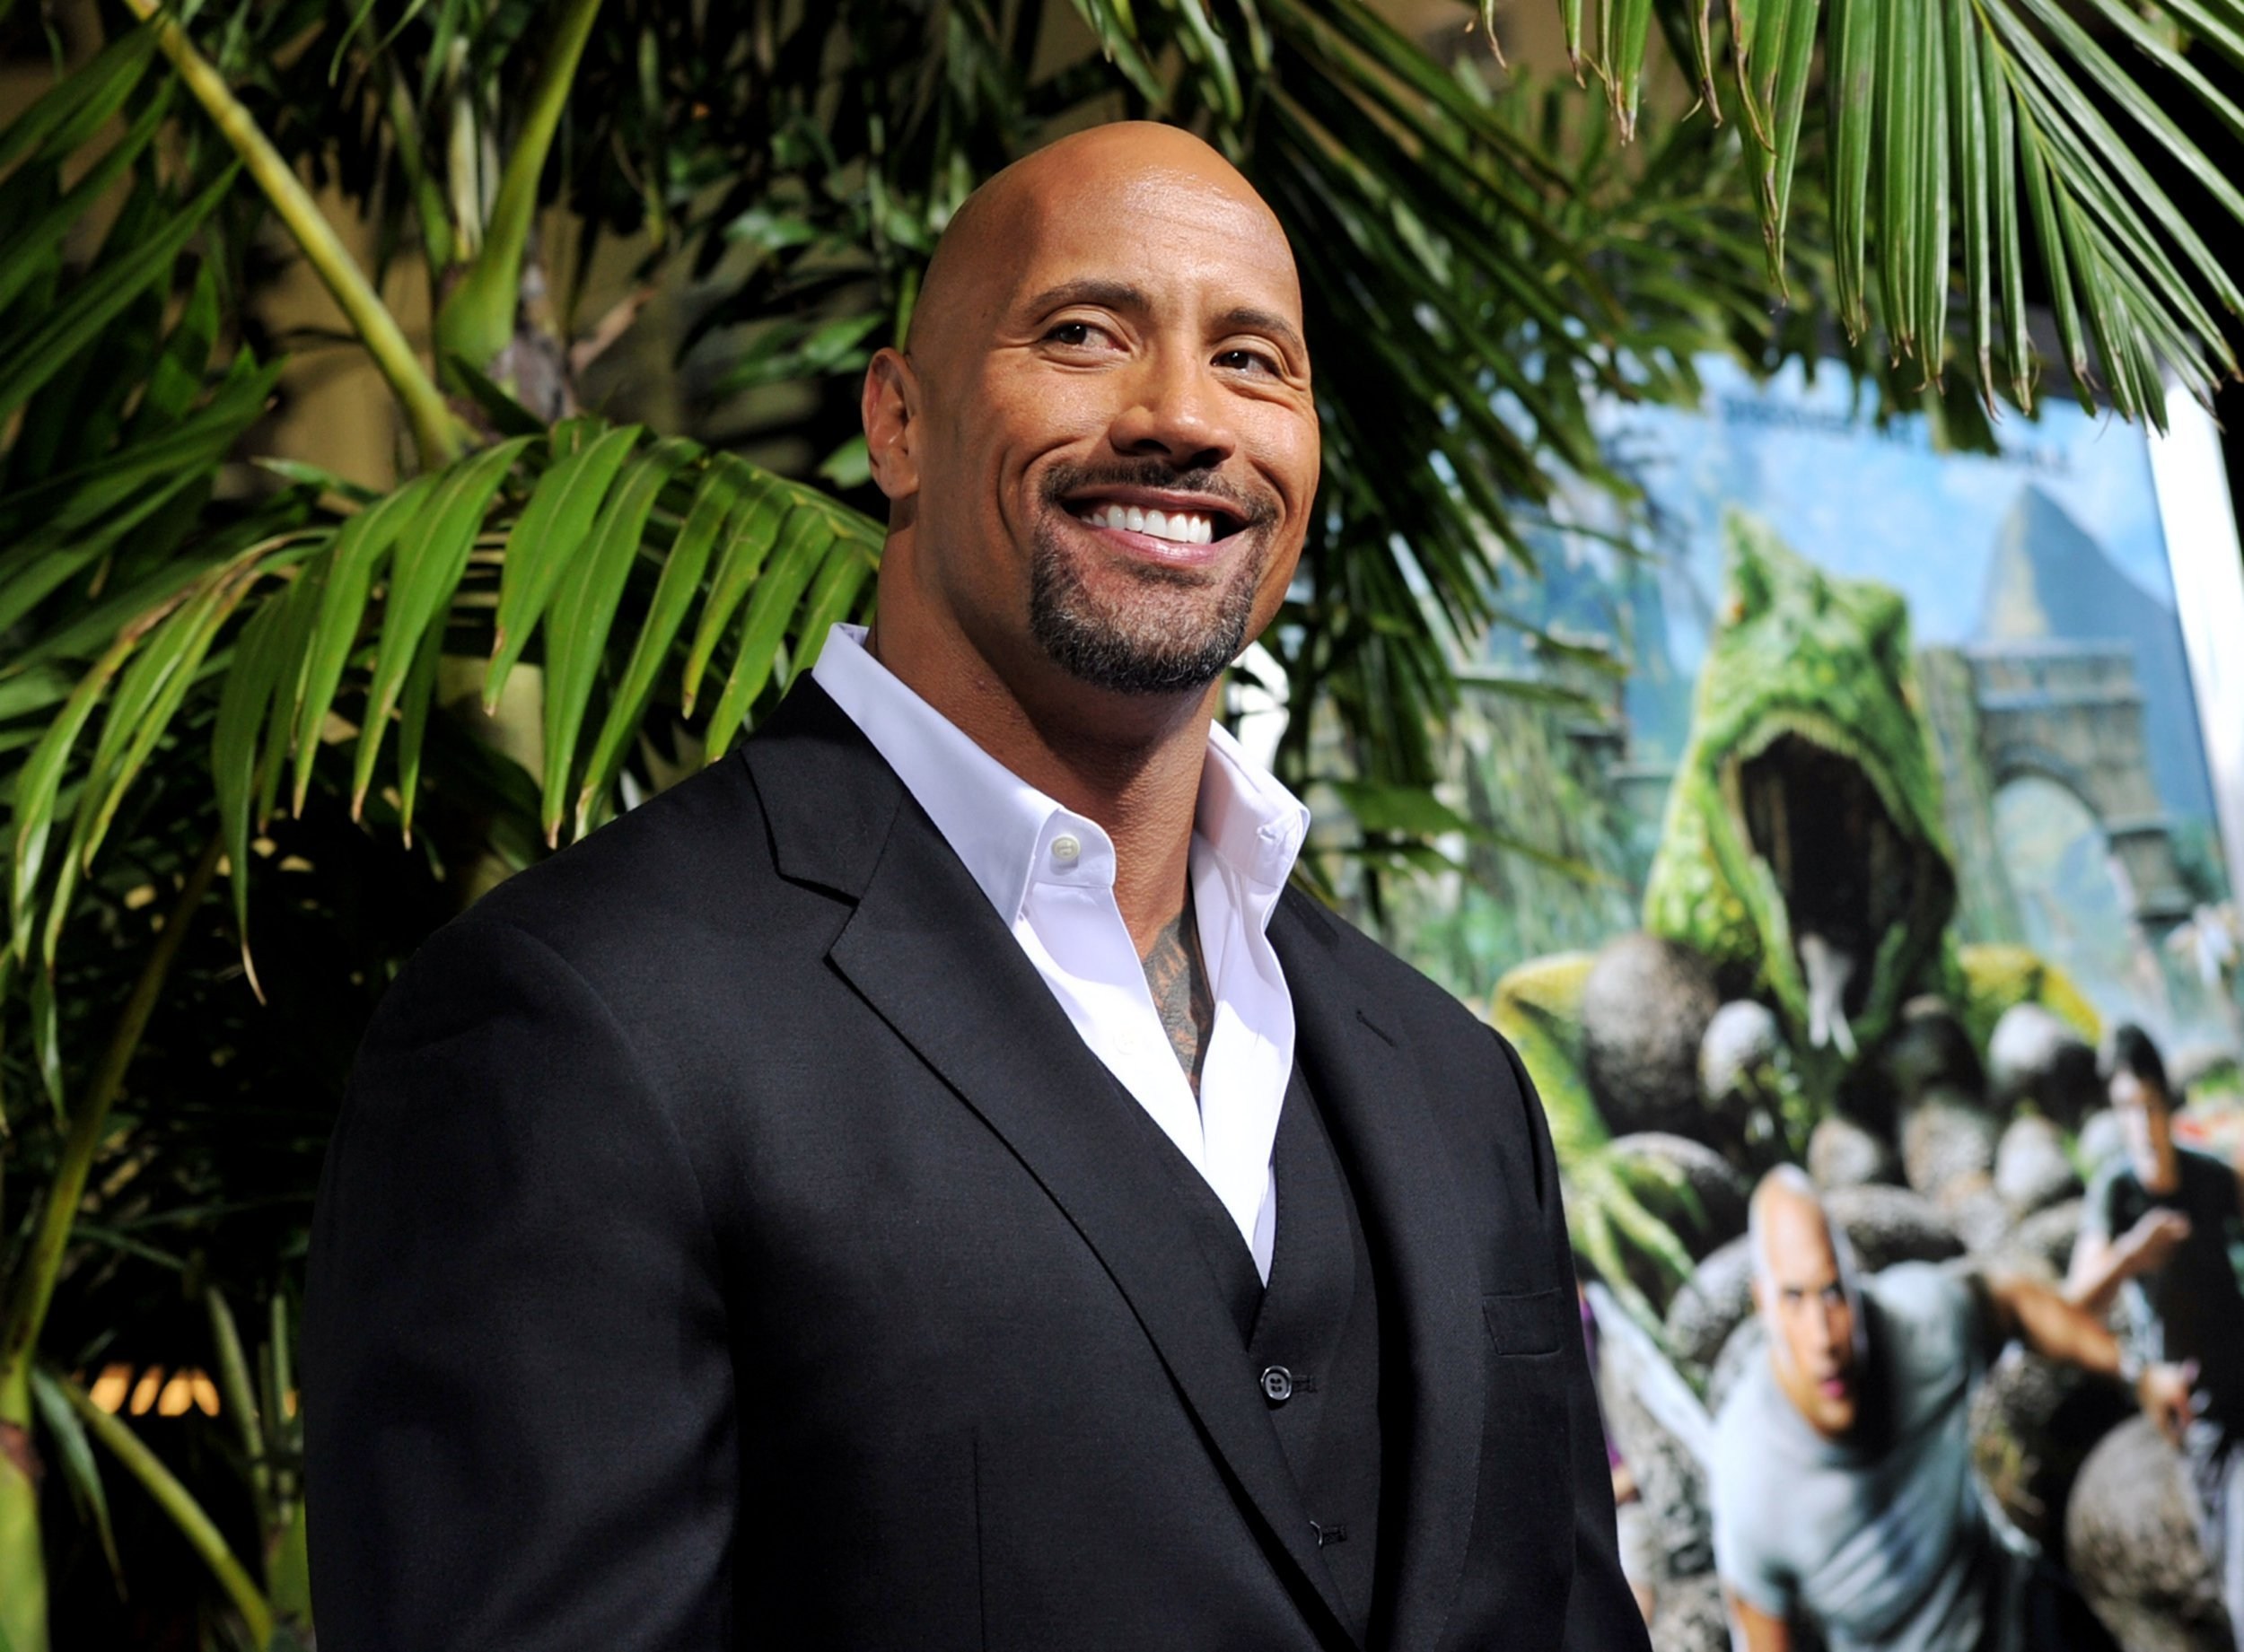 Dwayne Johnson explains why Jungle Cruise has been delayed ‘again’ until 2021